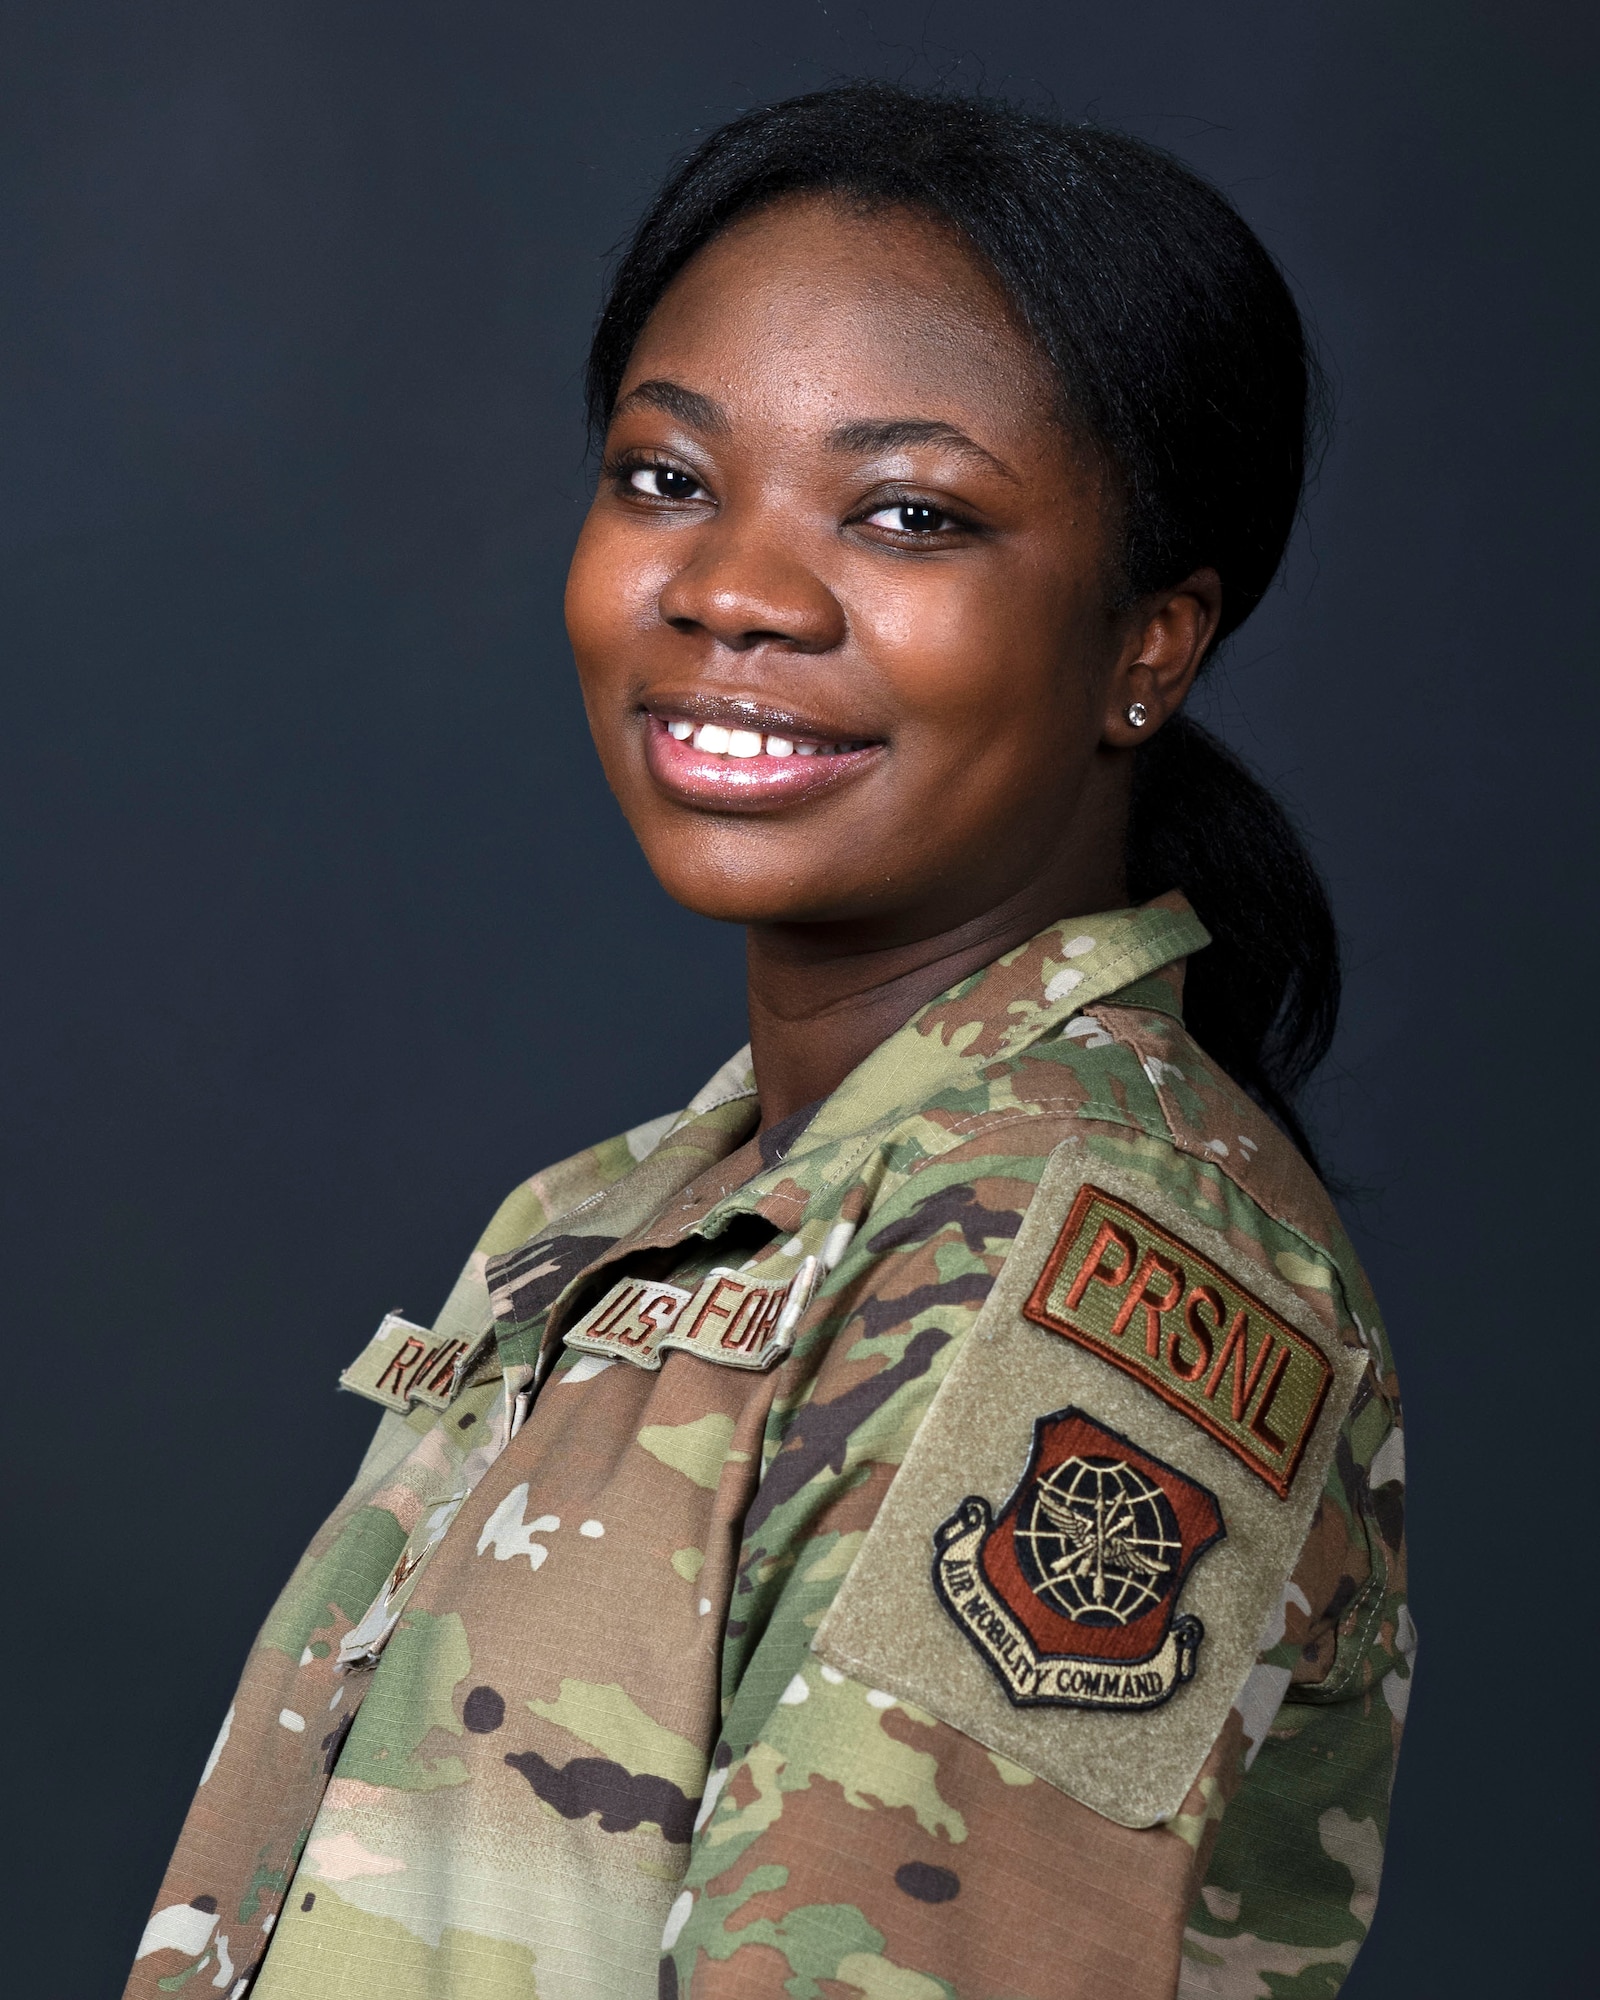 U.S. Air Force Airman 1st Class Vera Rushwaya, 92nd Force Support Squadron customer service technician, poses for a portrait photo at Fairchild Air Force Base, Washington, March 22, 2023. Rushwaya moved from Ghana to the United States when she was 14 and joined the military when she was 21. (U.S. Air Force photo by Airman 1st Class Morgan Dailey)